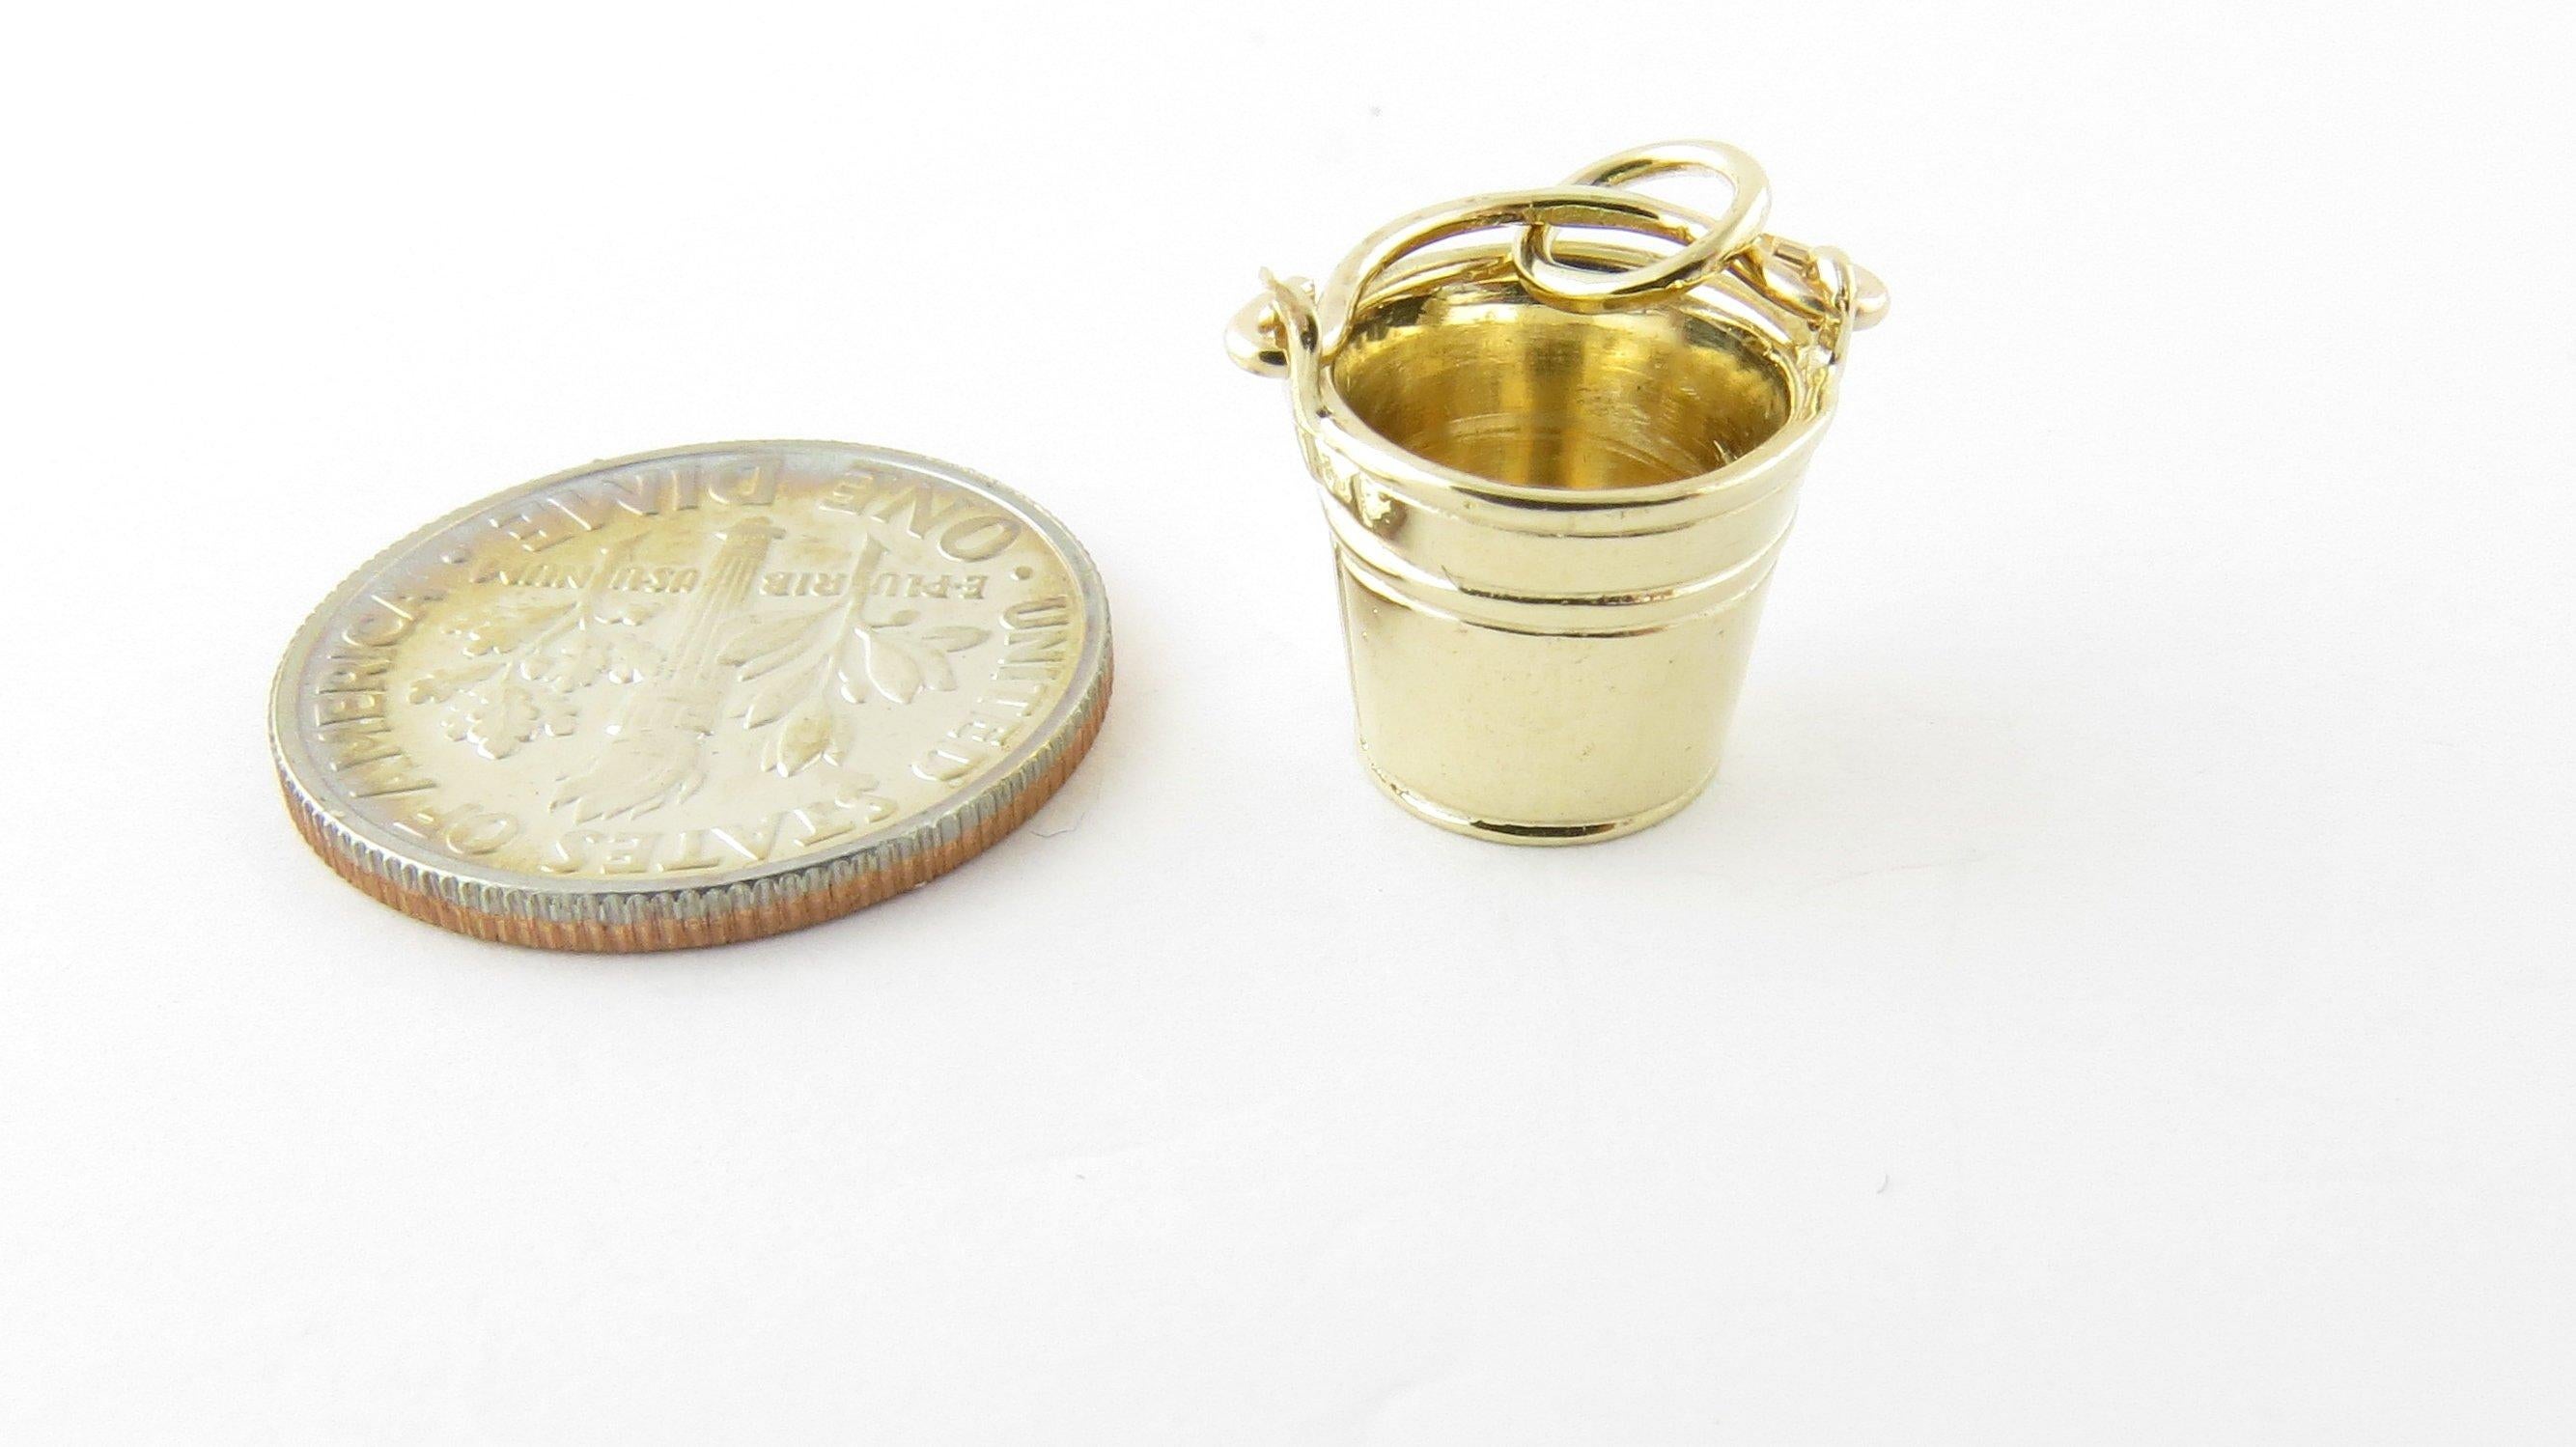 Vintage 14 Karat Yellow Gold Bucket Charm. Check this charm off your 